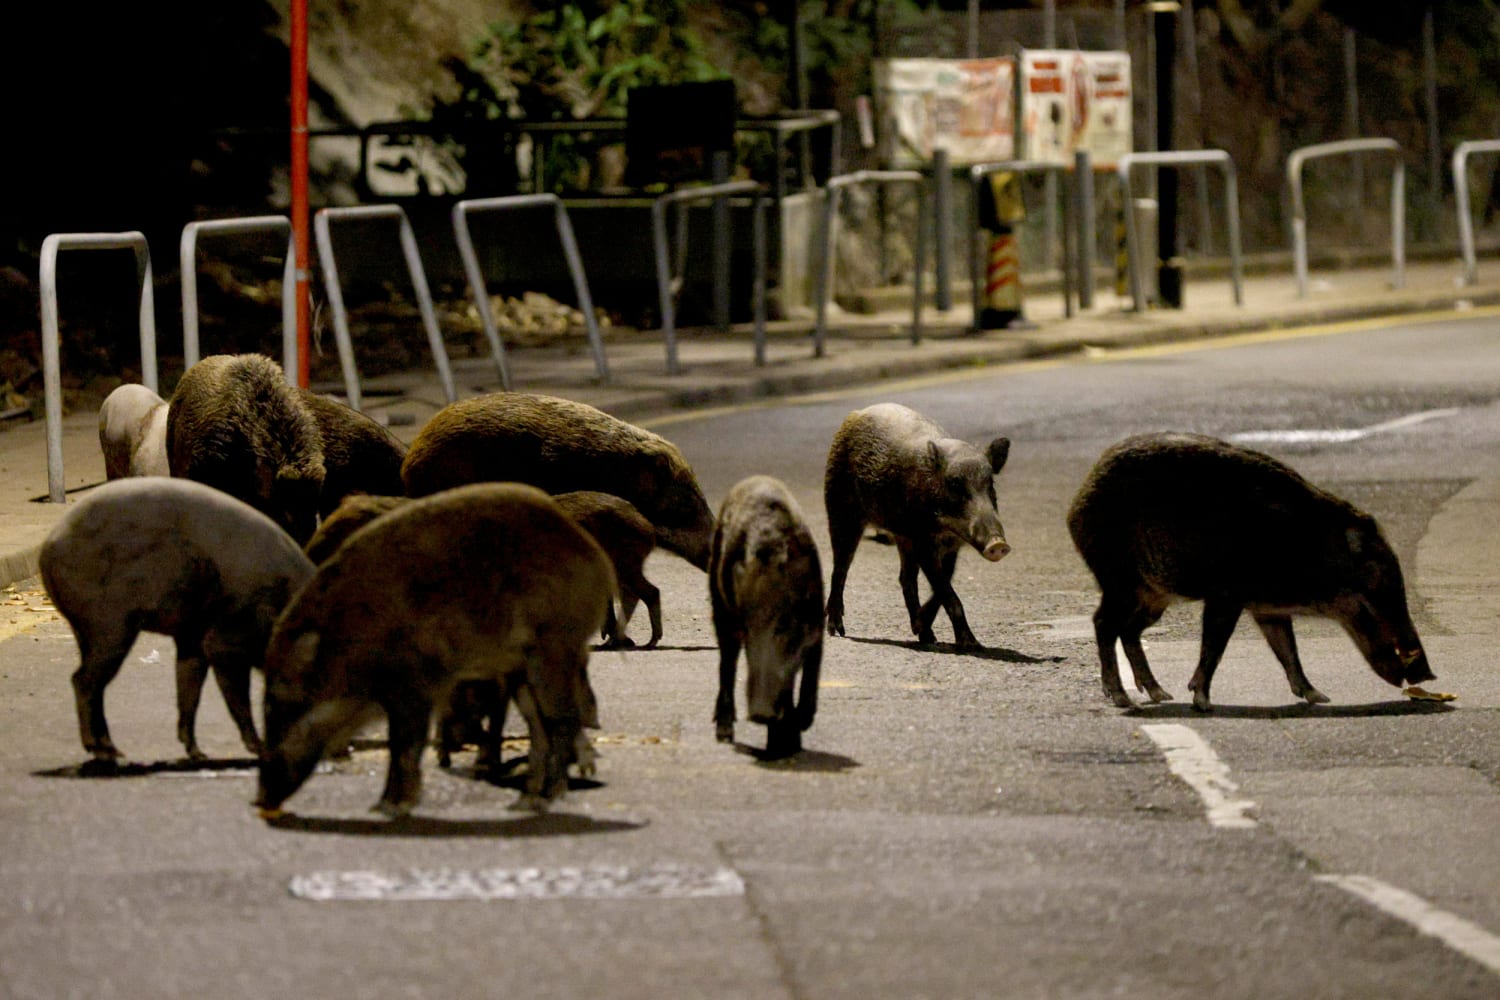 Hong Kong launches wild boar hunt as animal attacks lead to controversial crackdown